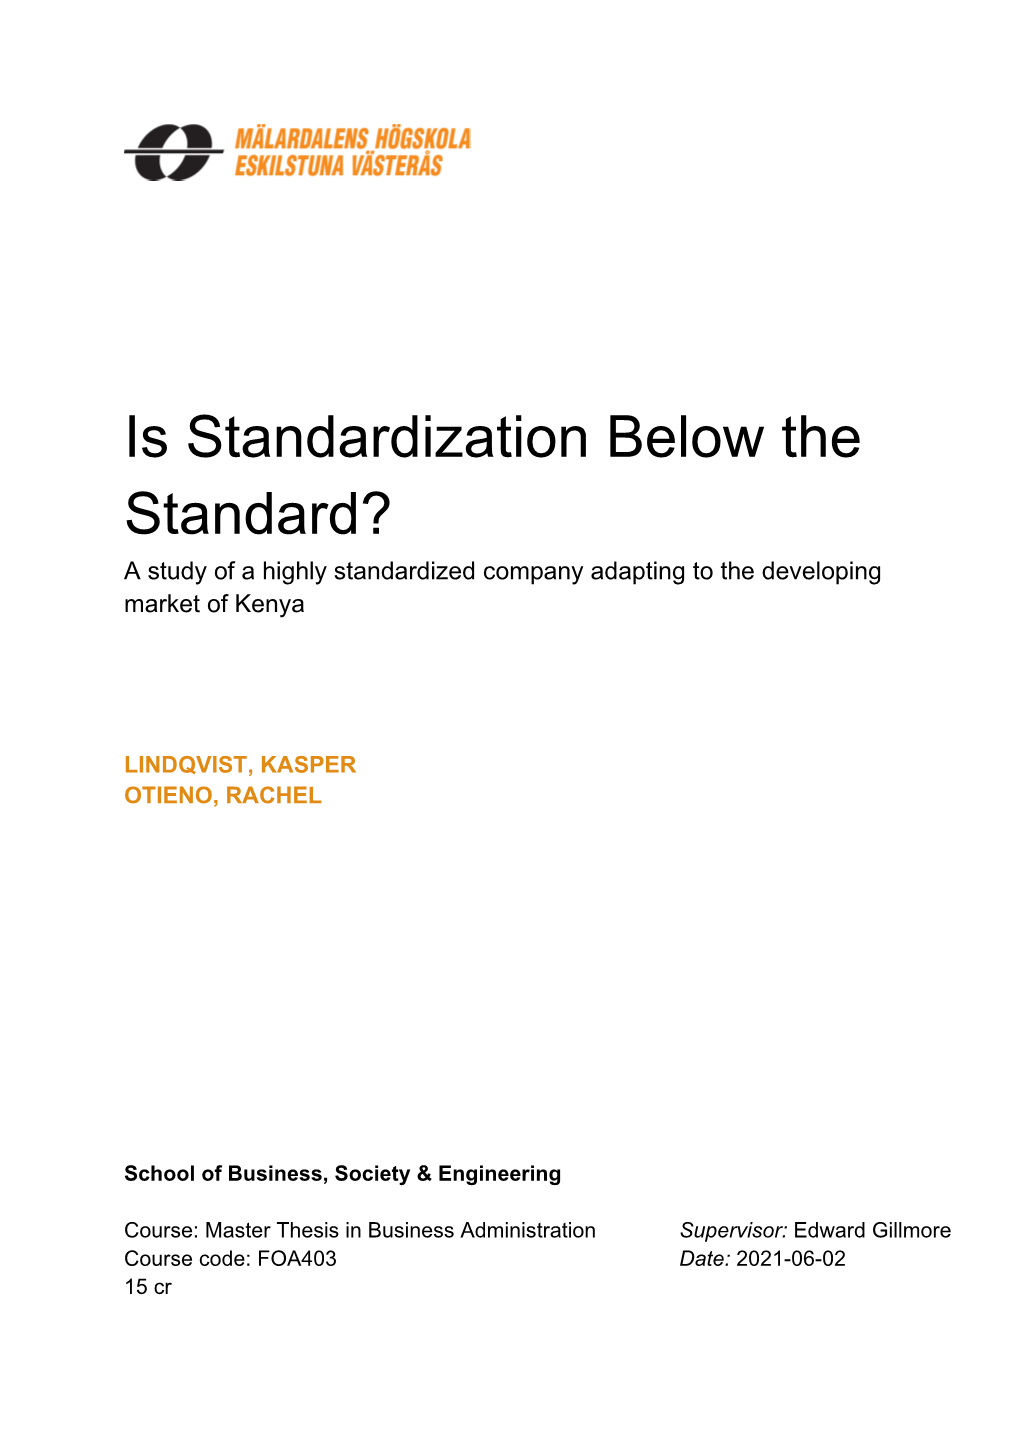 Is Standardization Below the Standard? a Study of a Highly Standardized Company Adapting to the Developing Market of Kenya